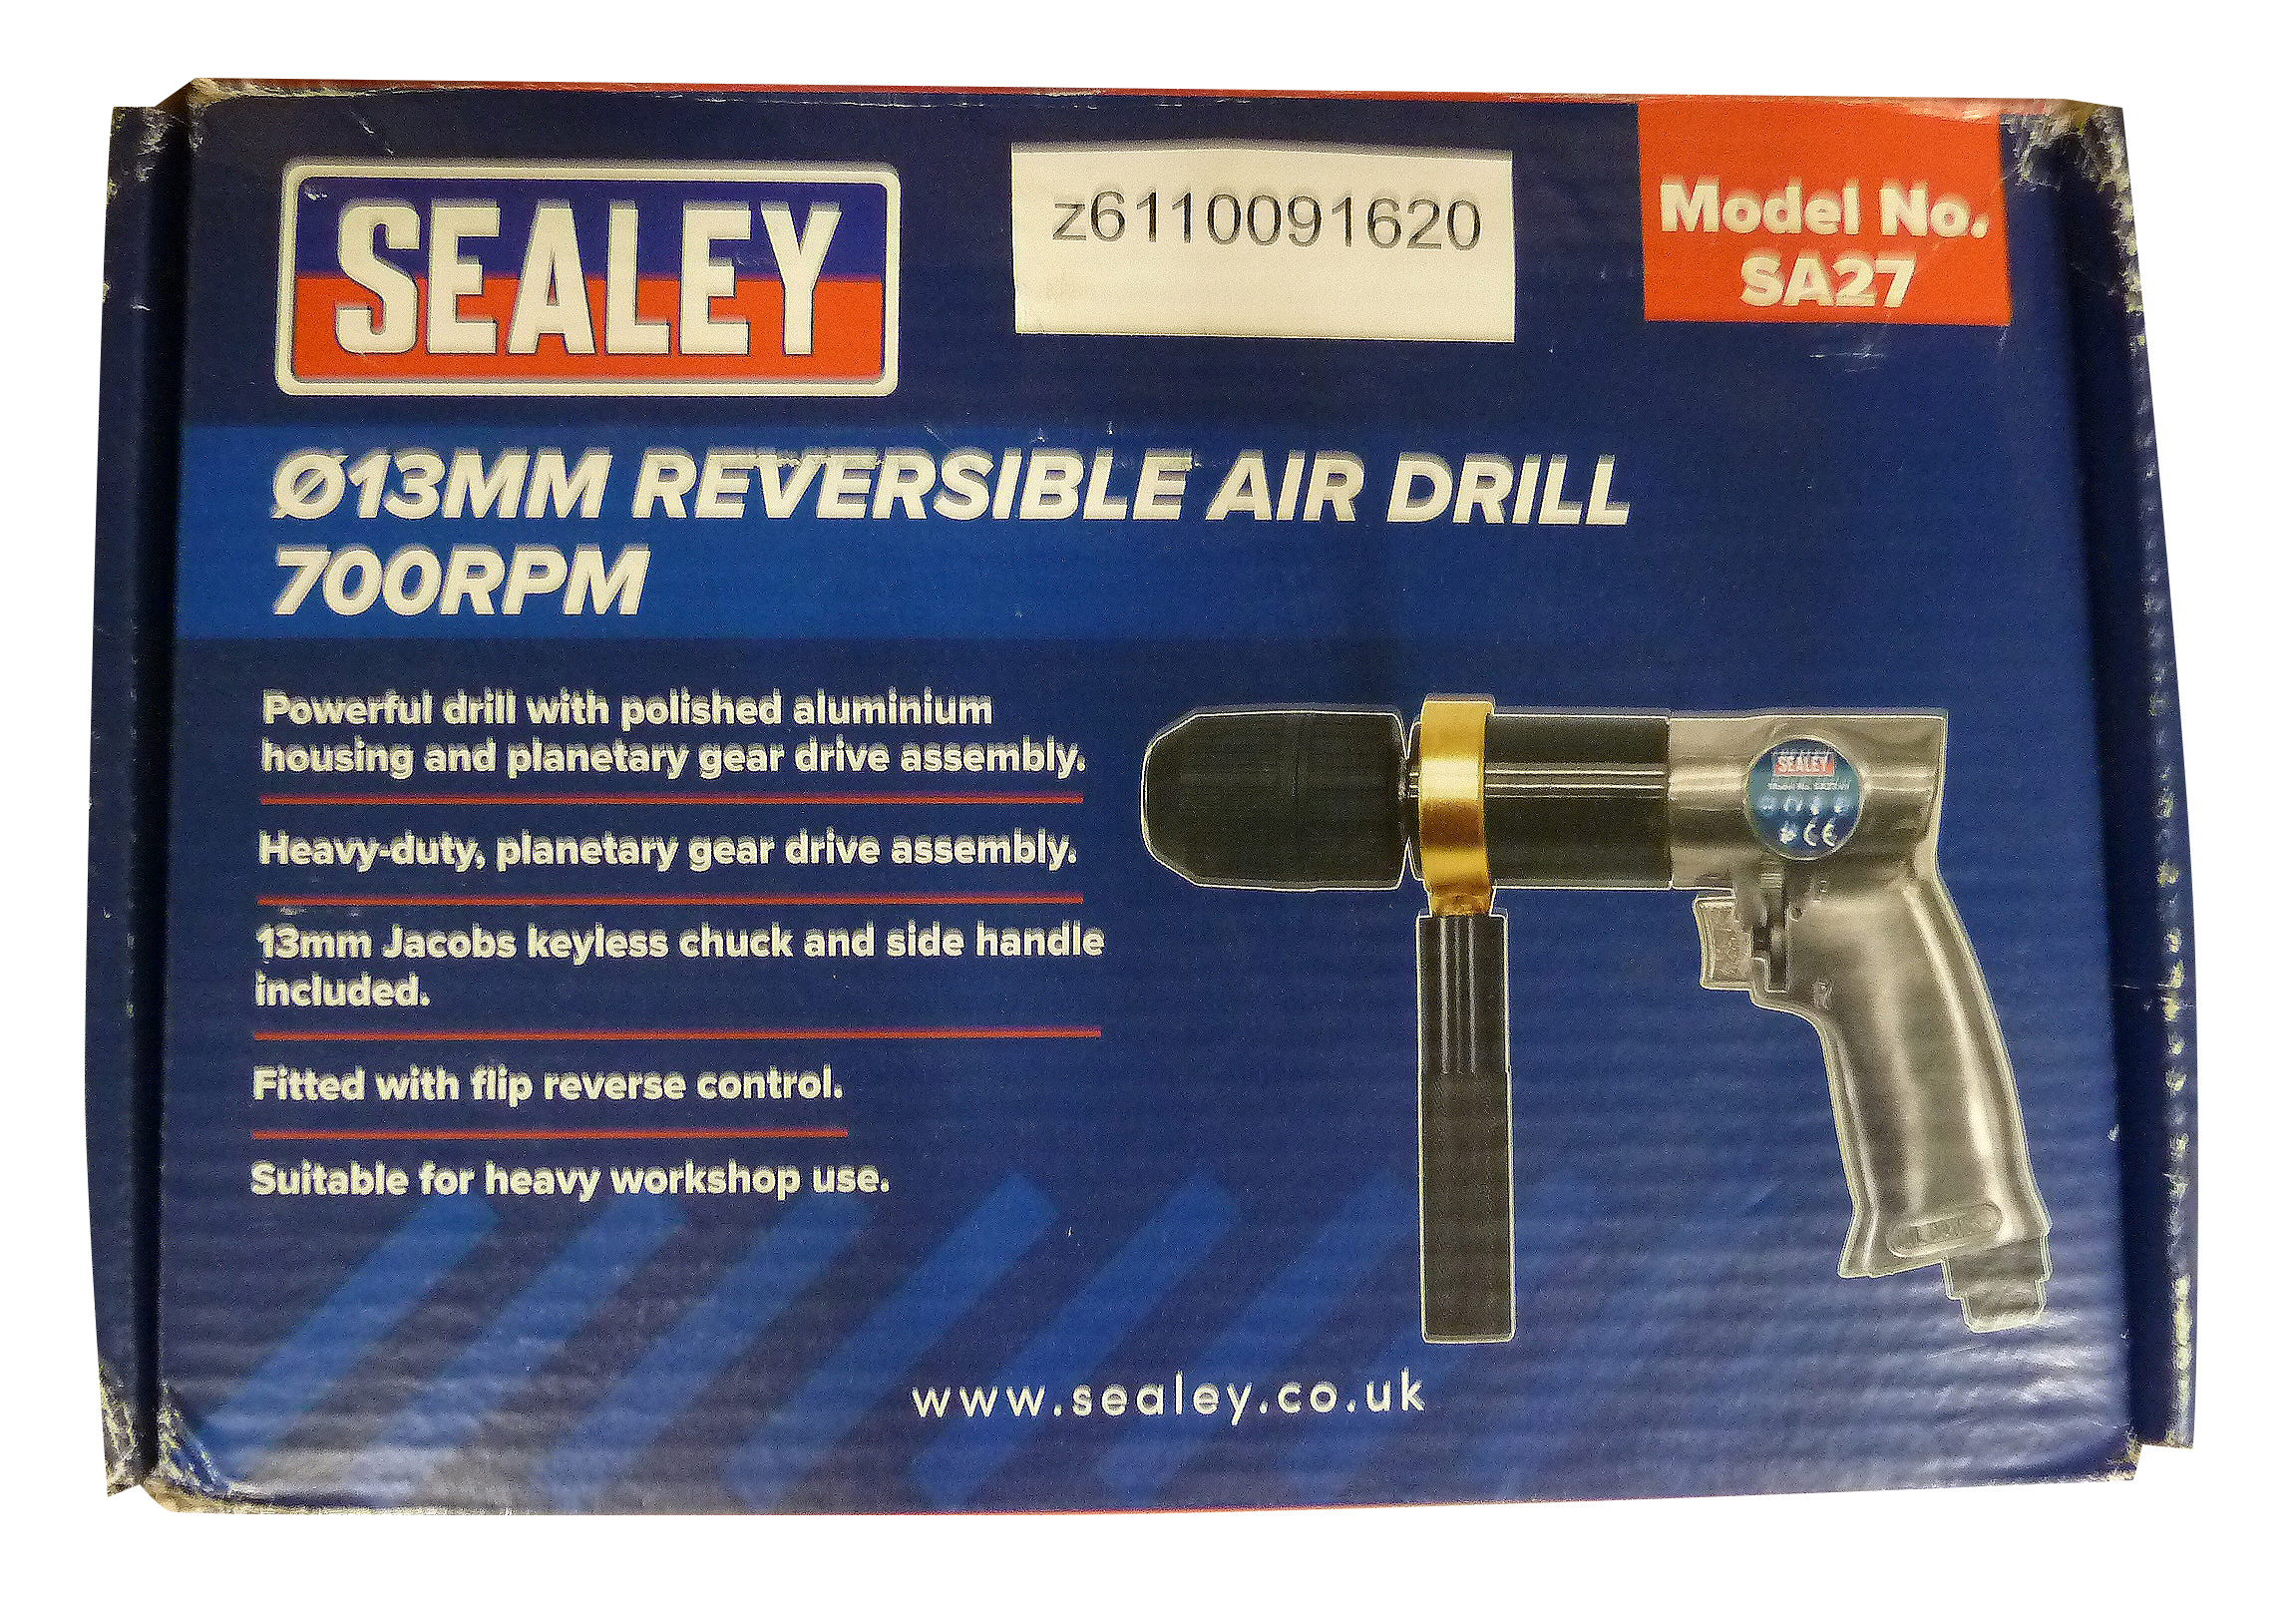 SEALY Reversible Air Drill